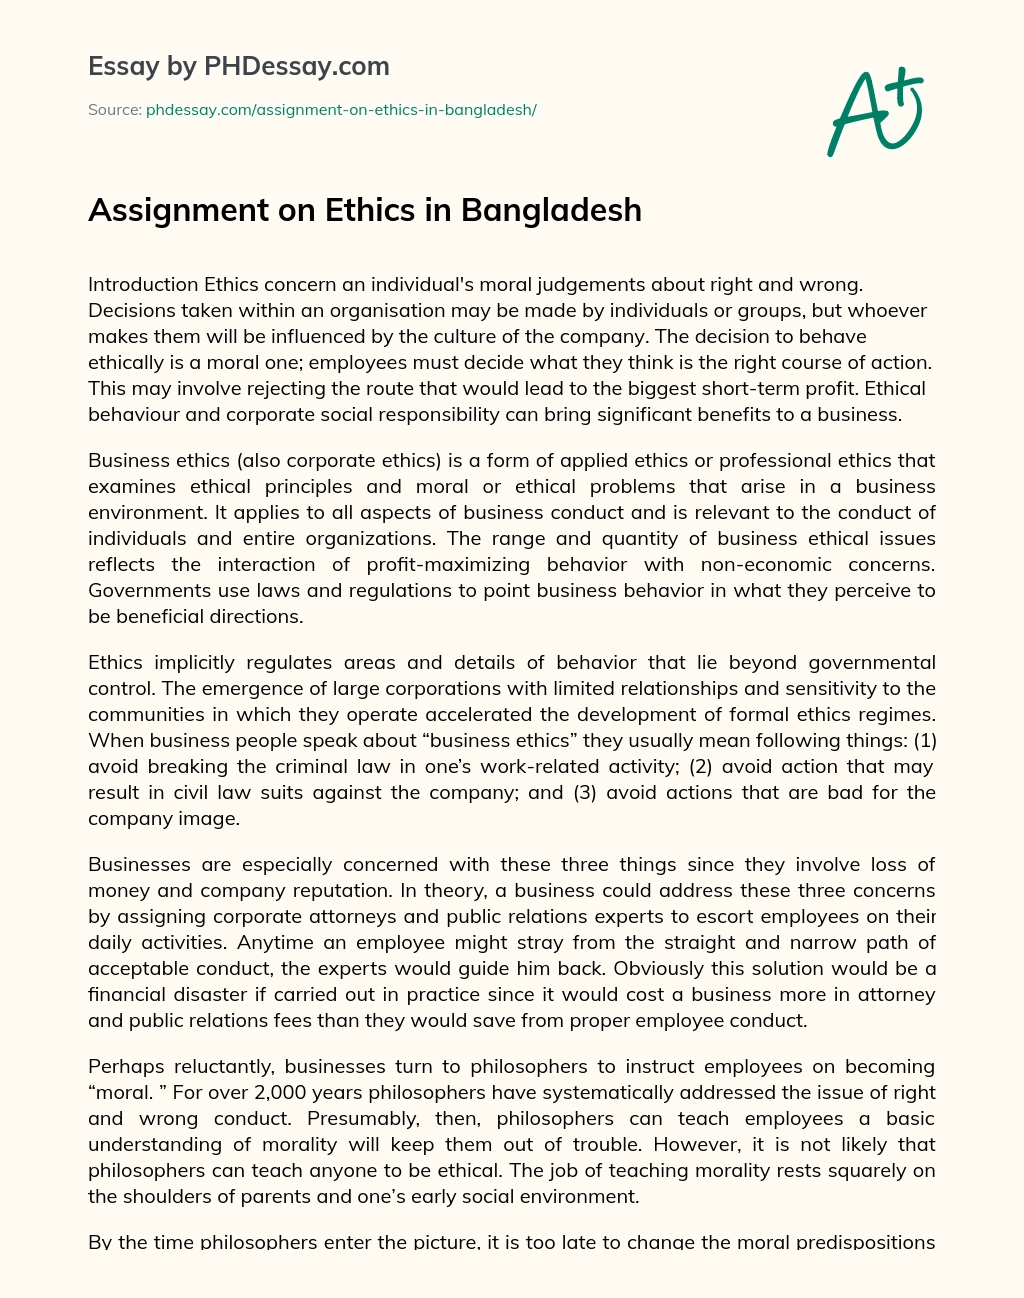 Assignment on Ethics in Bangladesh essay